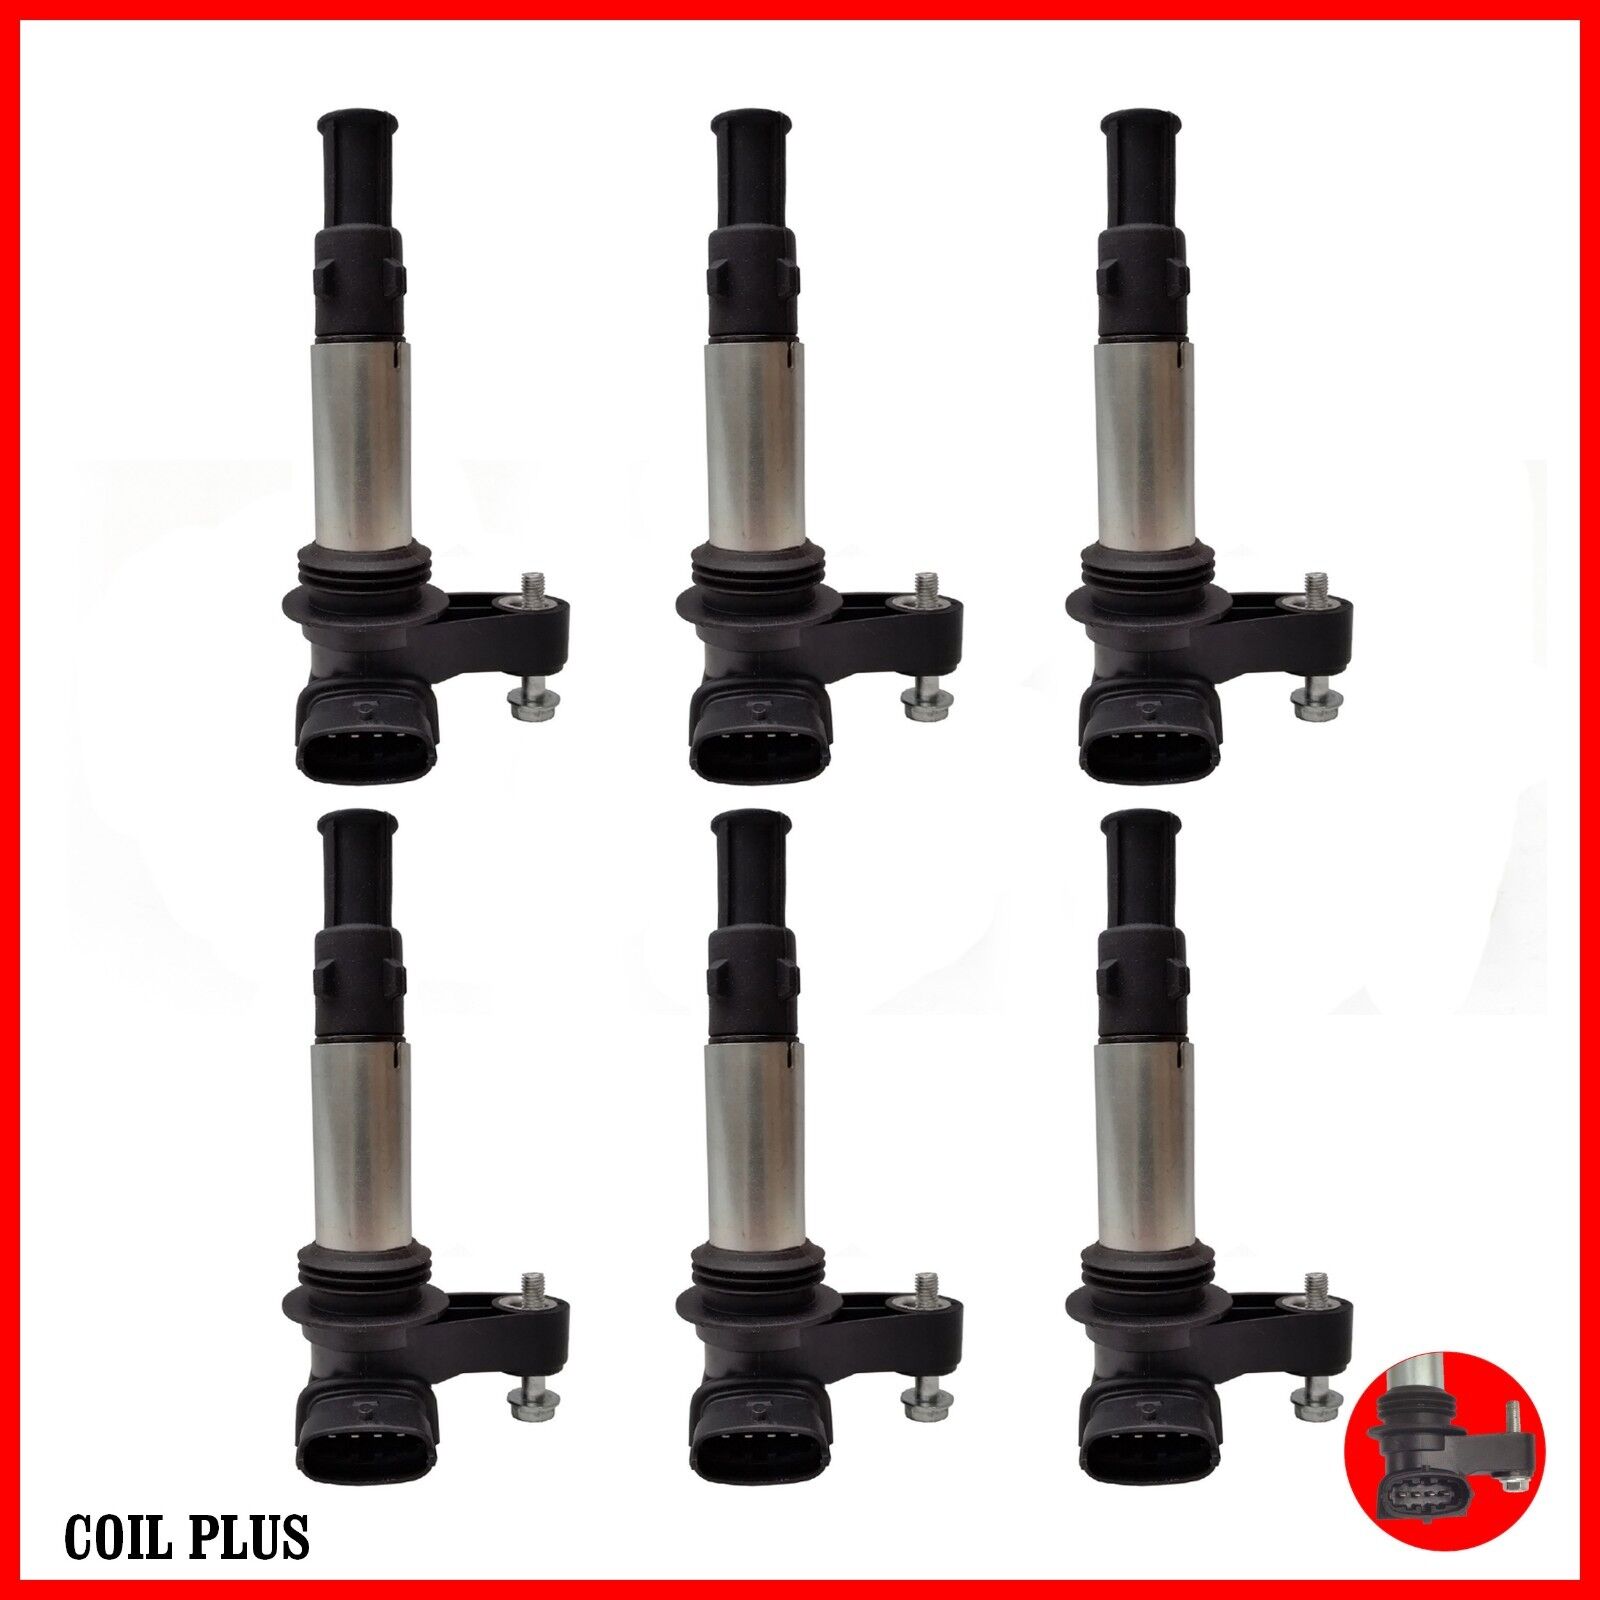 6 x Brand New Ignition Coil Holden Adventra Berlina 3.6L SAAB 9-3 2.8L Turbo Eng